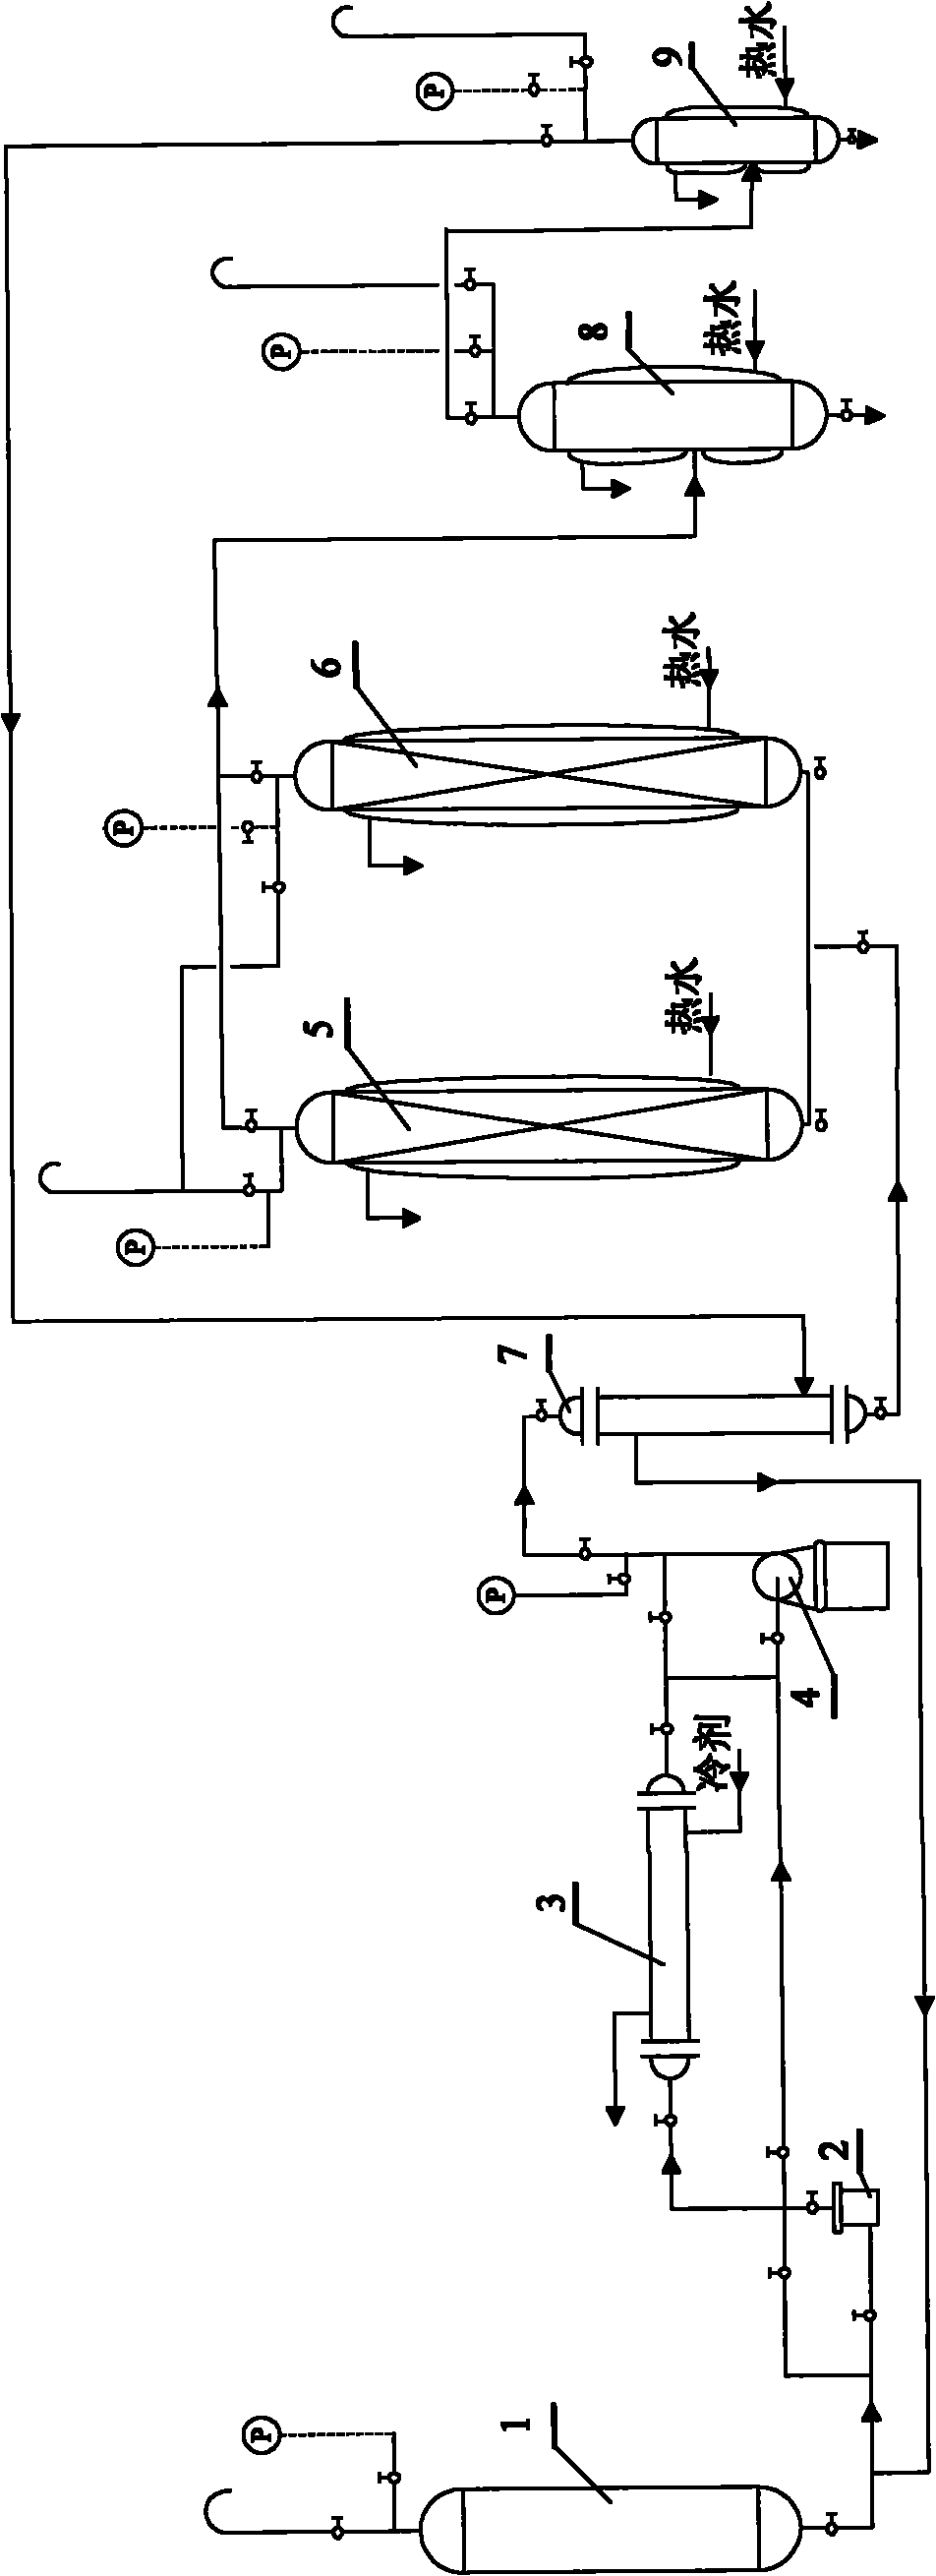 Production method for extracting zedoary turmeric oil by using supercritical CO2